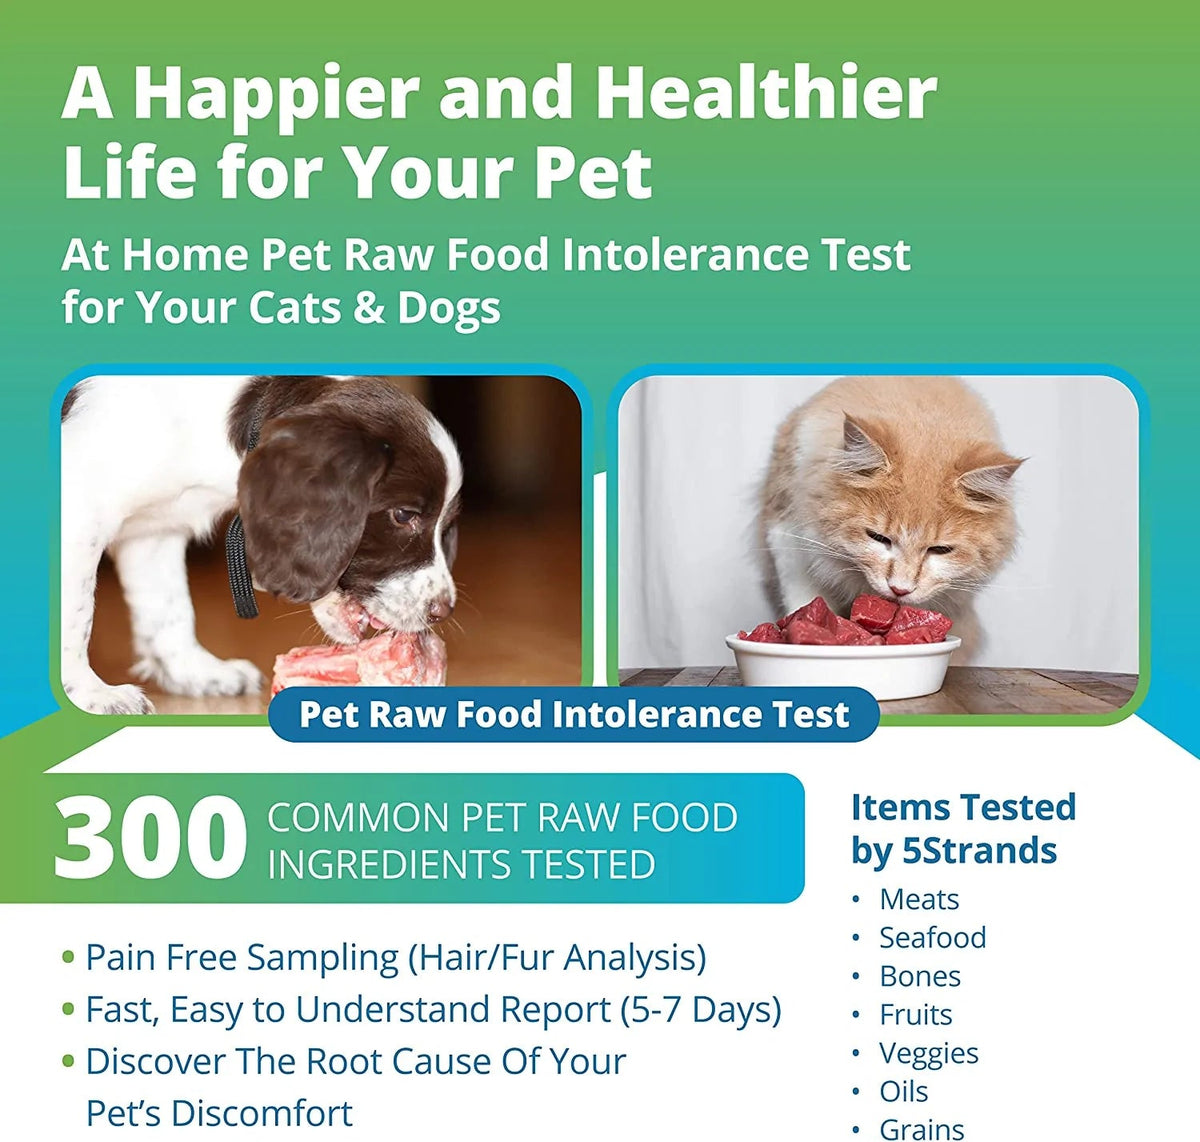 Pet Raw Food Intolerance Test 5strands Test Kit-Four Muddy Paws